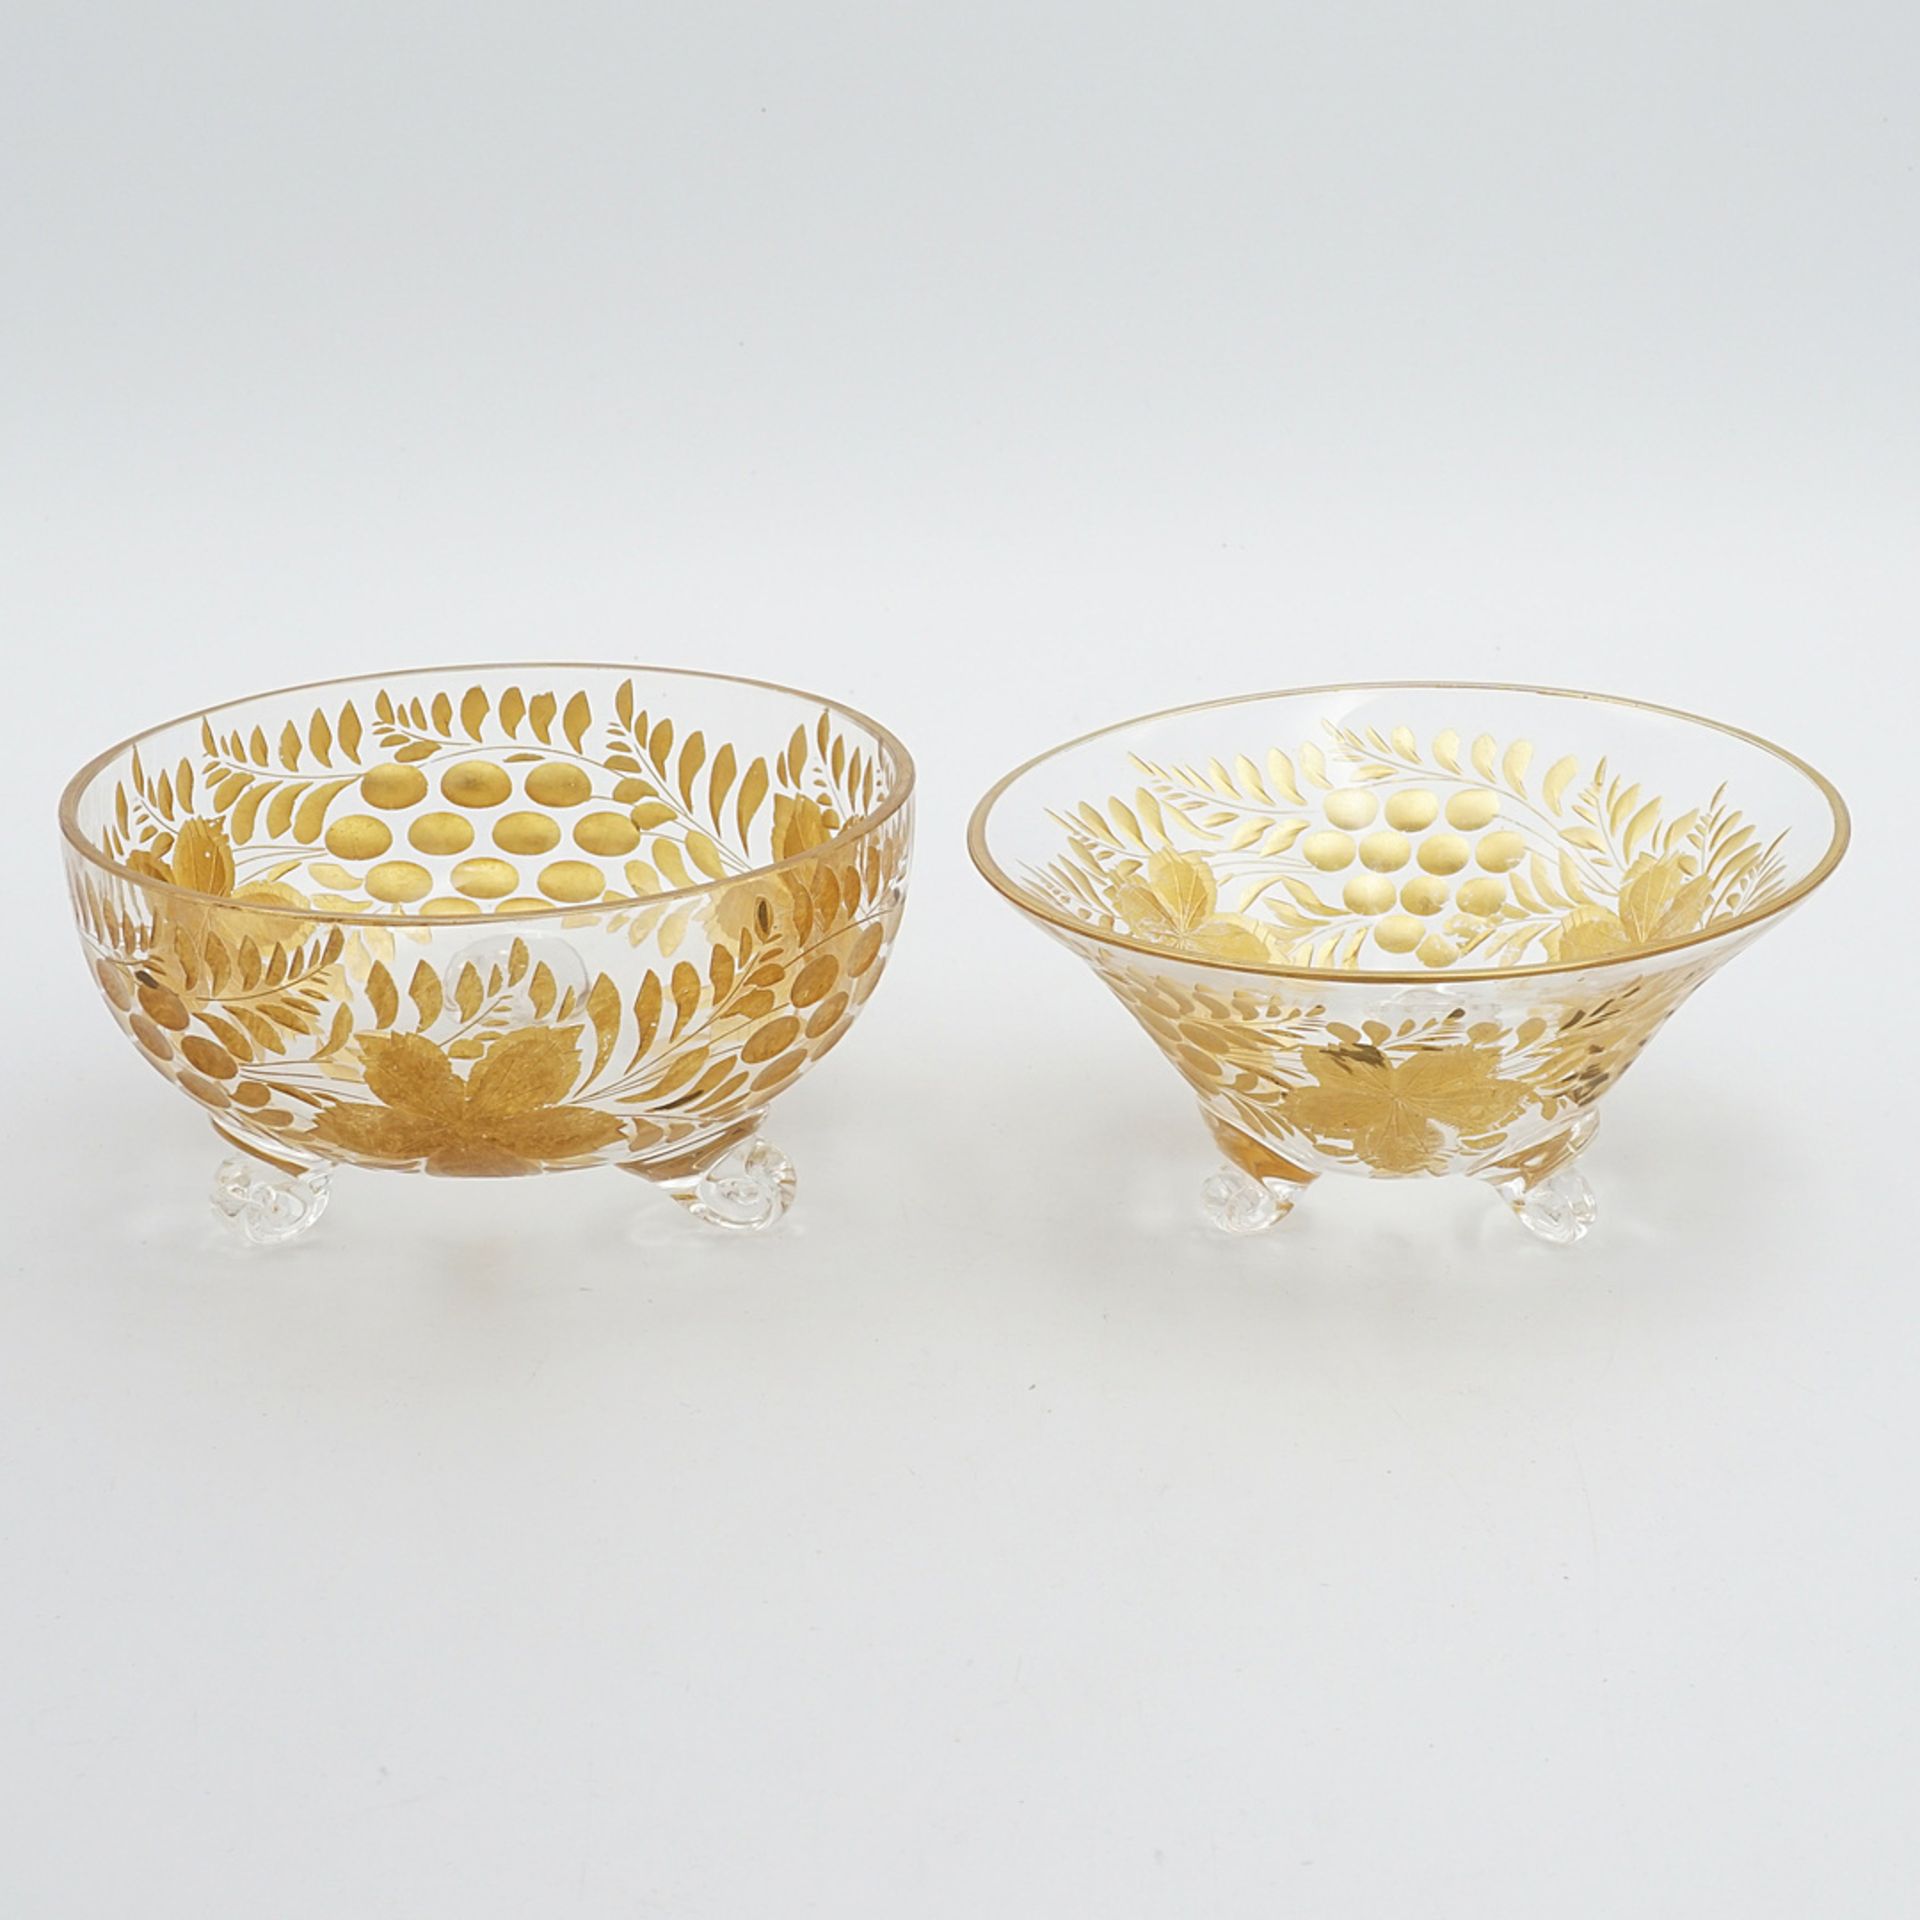 Two footed bowls, 1st half of the 20th century